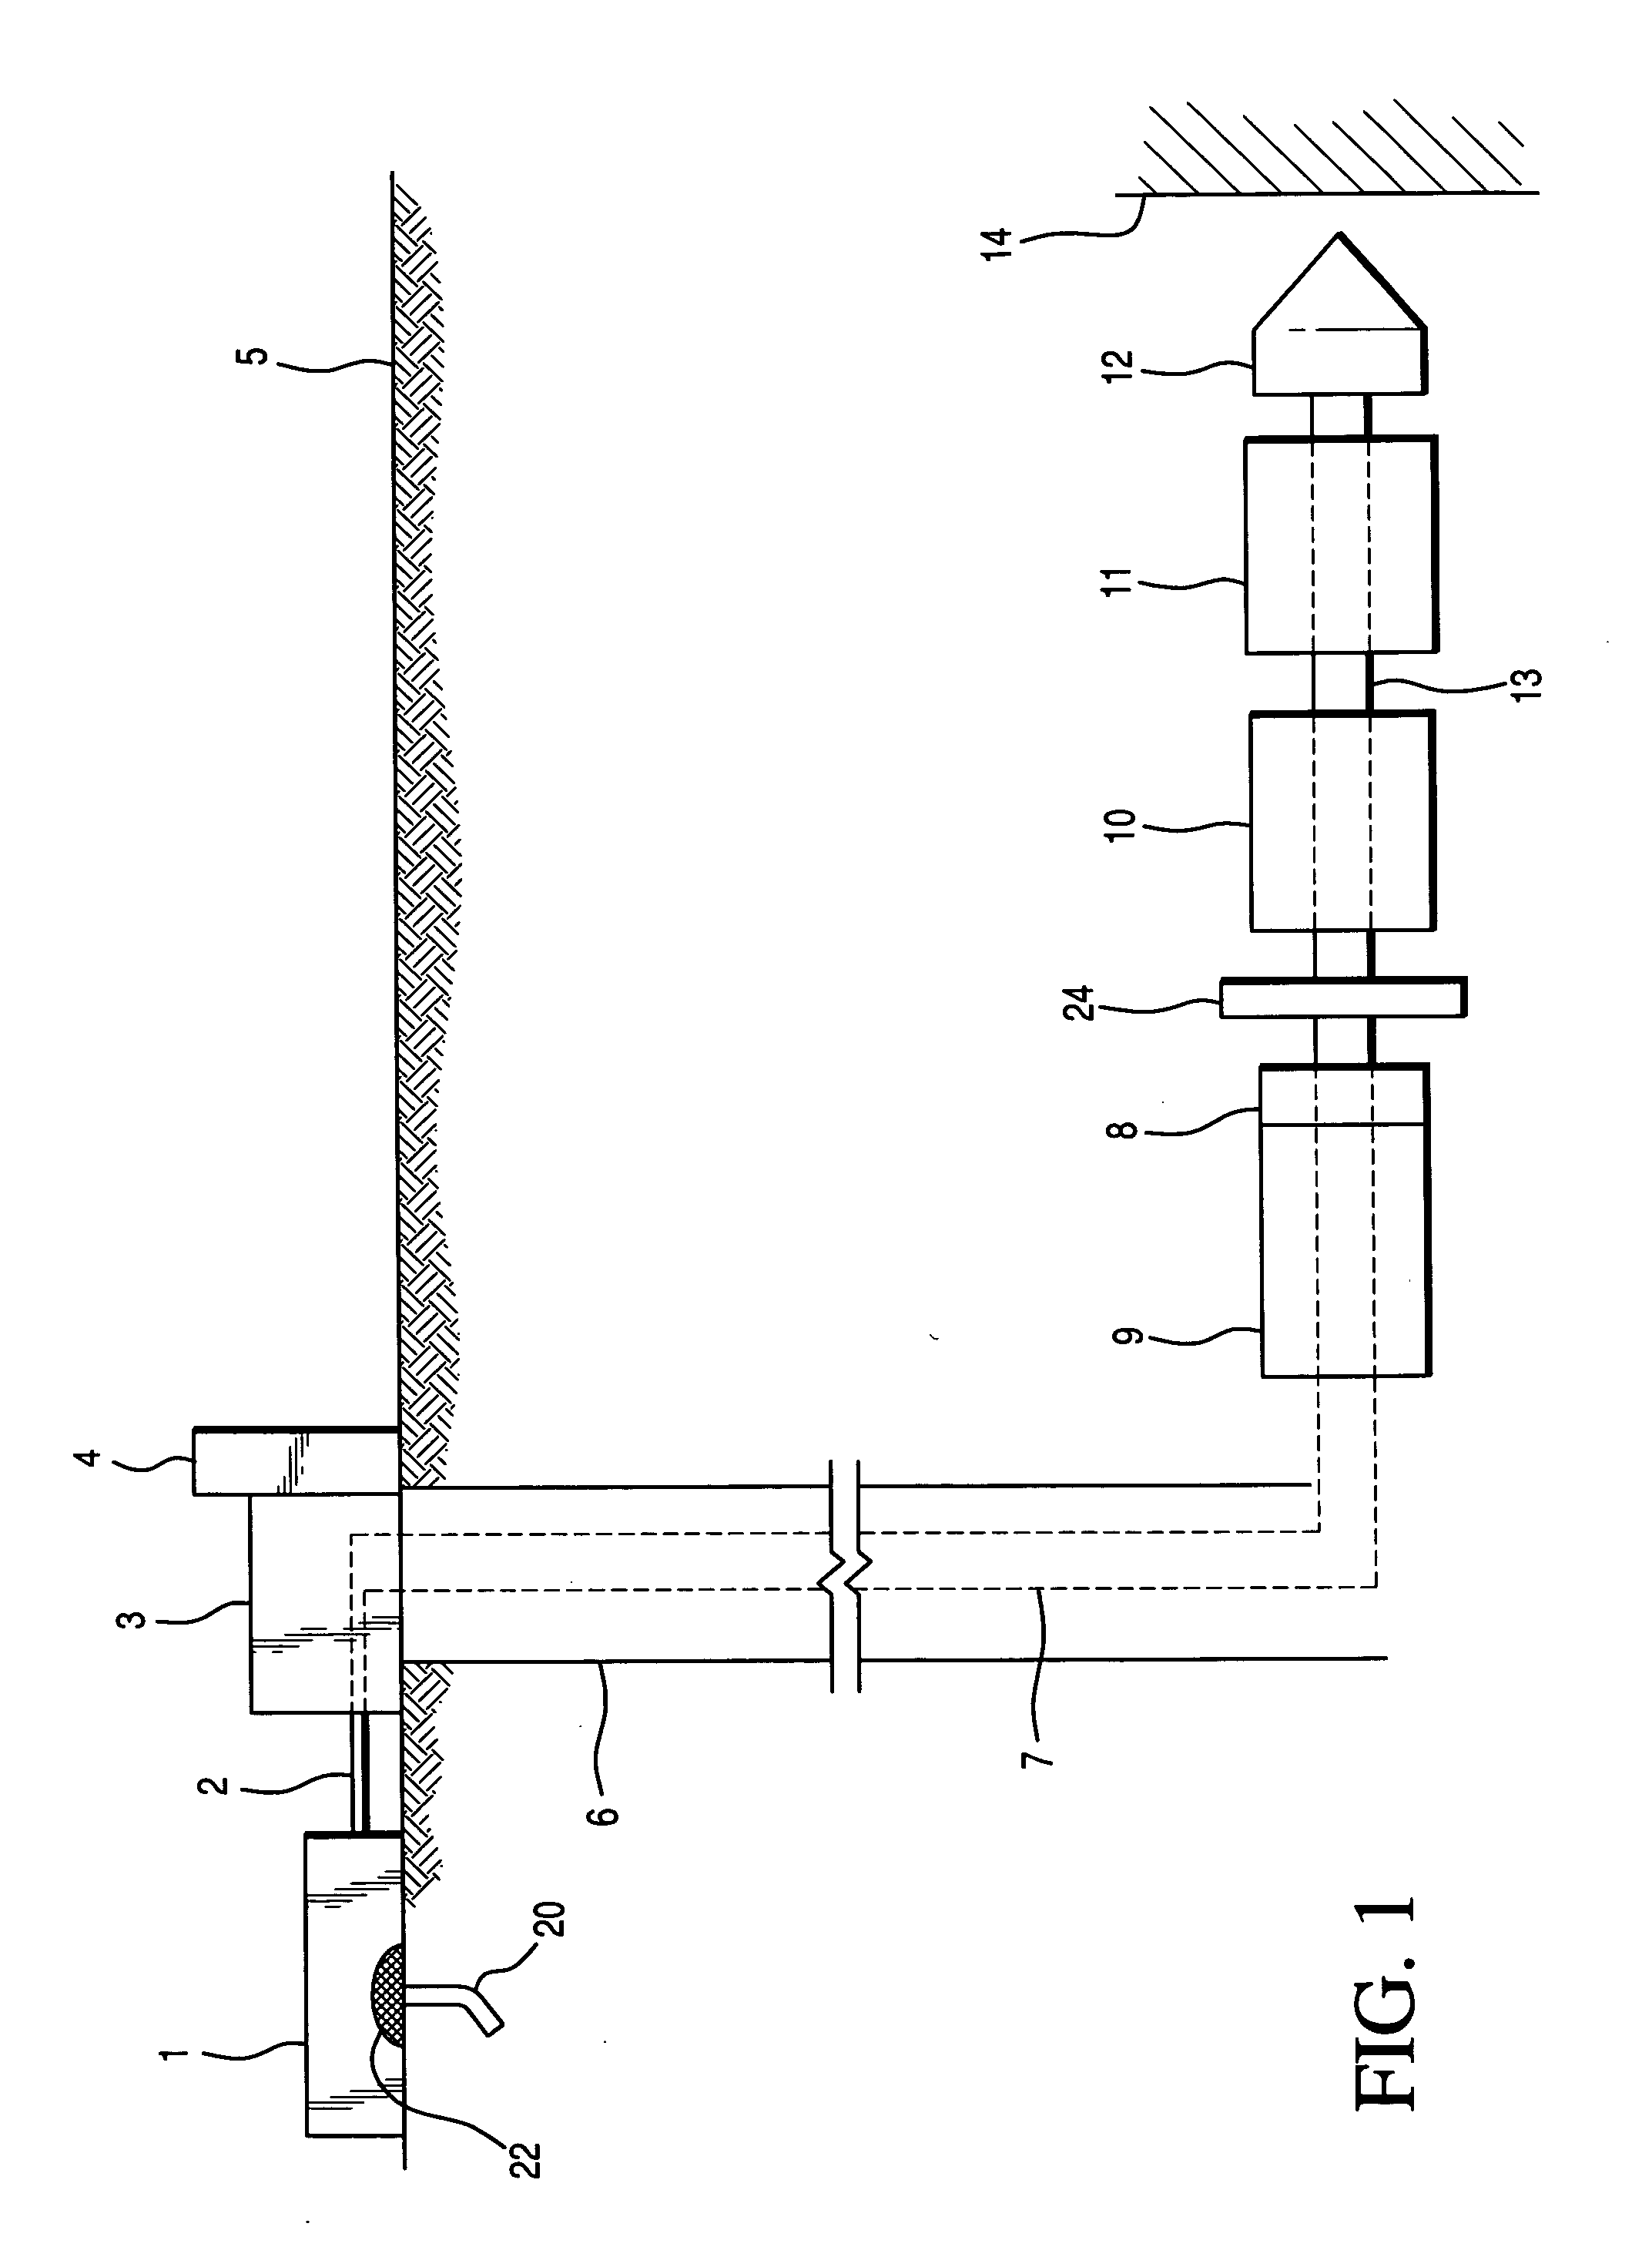 Apparatus and method for mining coal